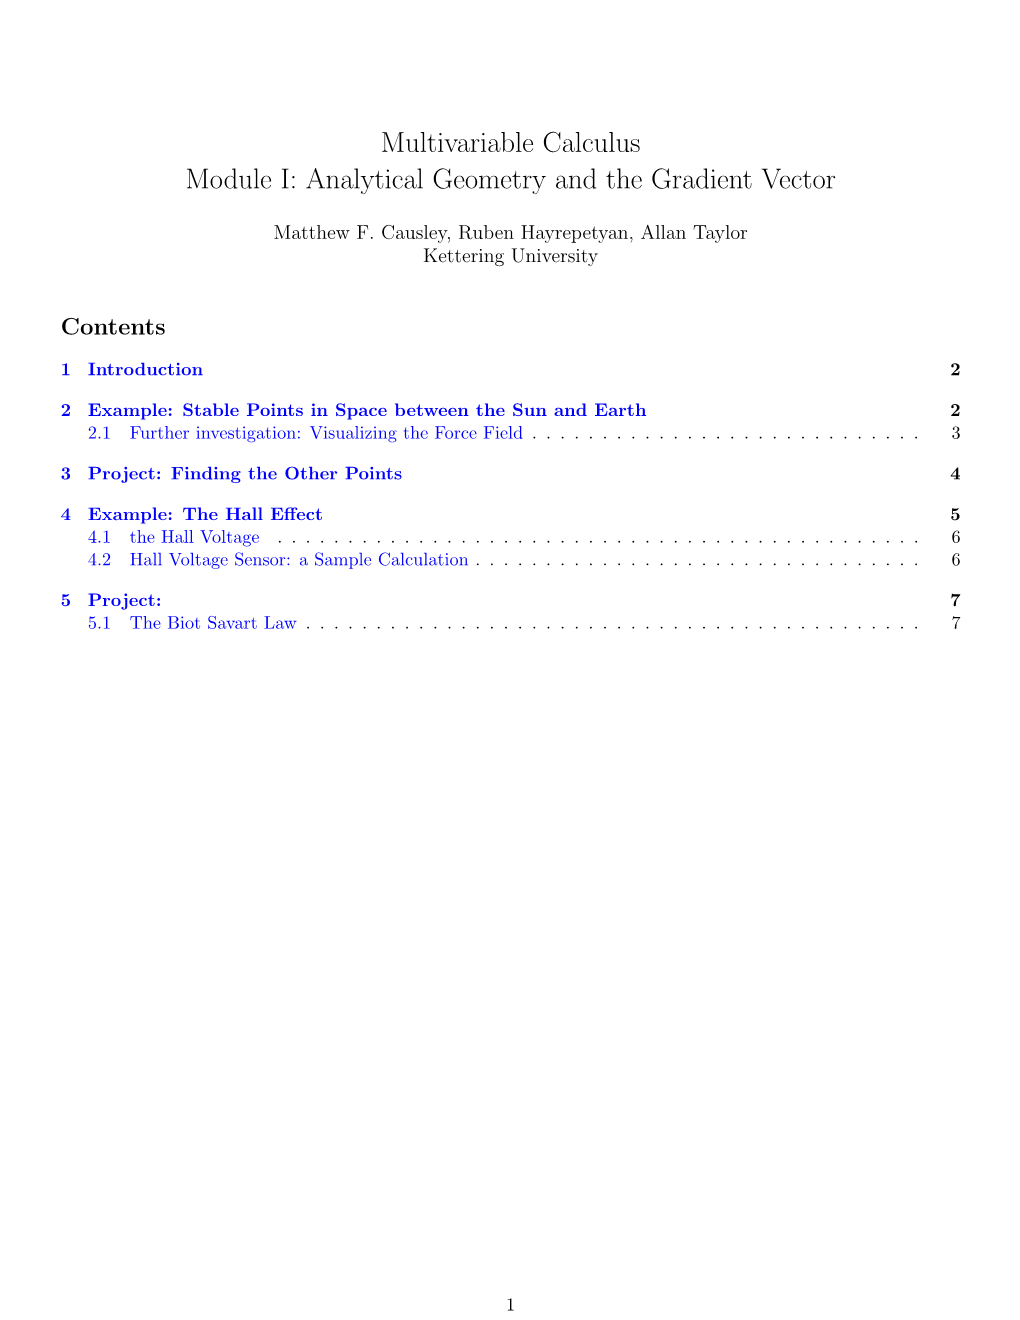 Multivariable Calculus Module I: Analytical Geometry and the Gradient Vector